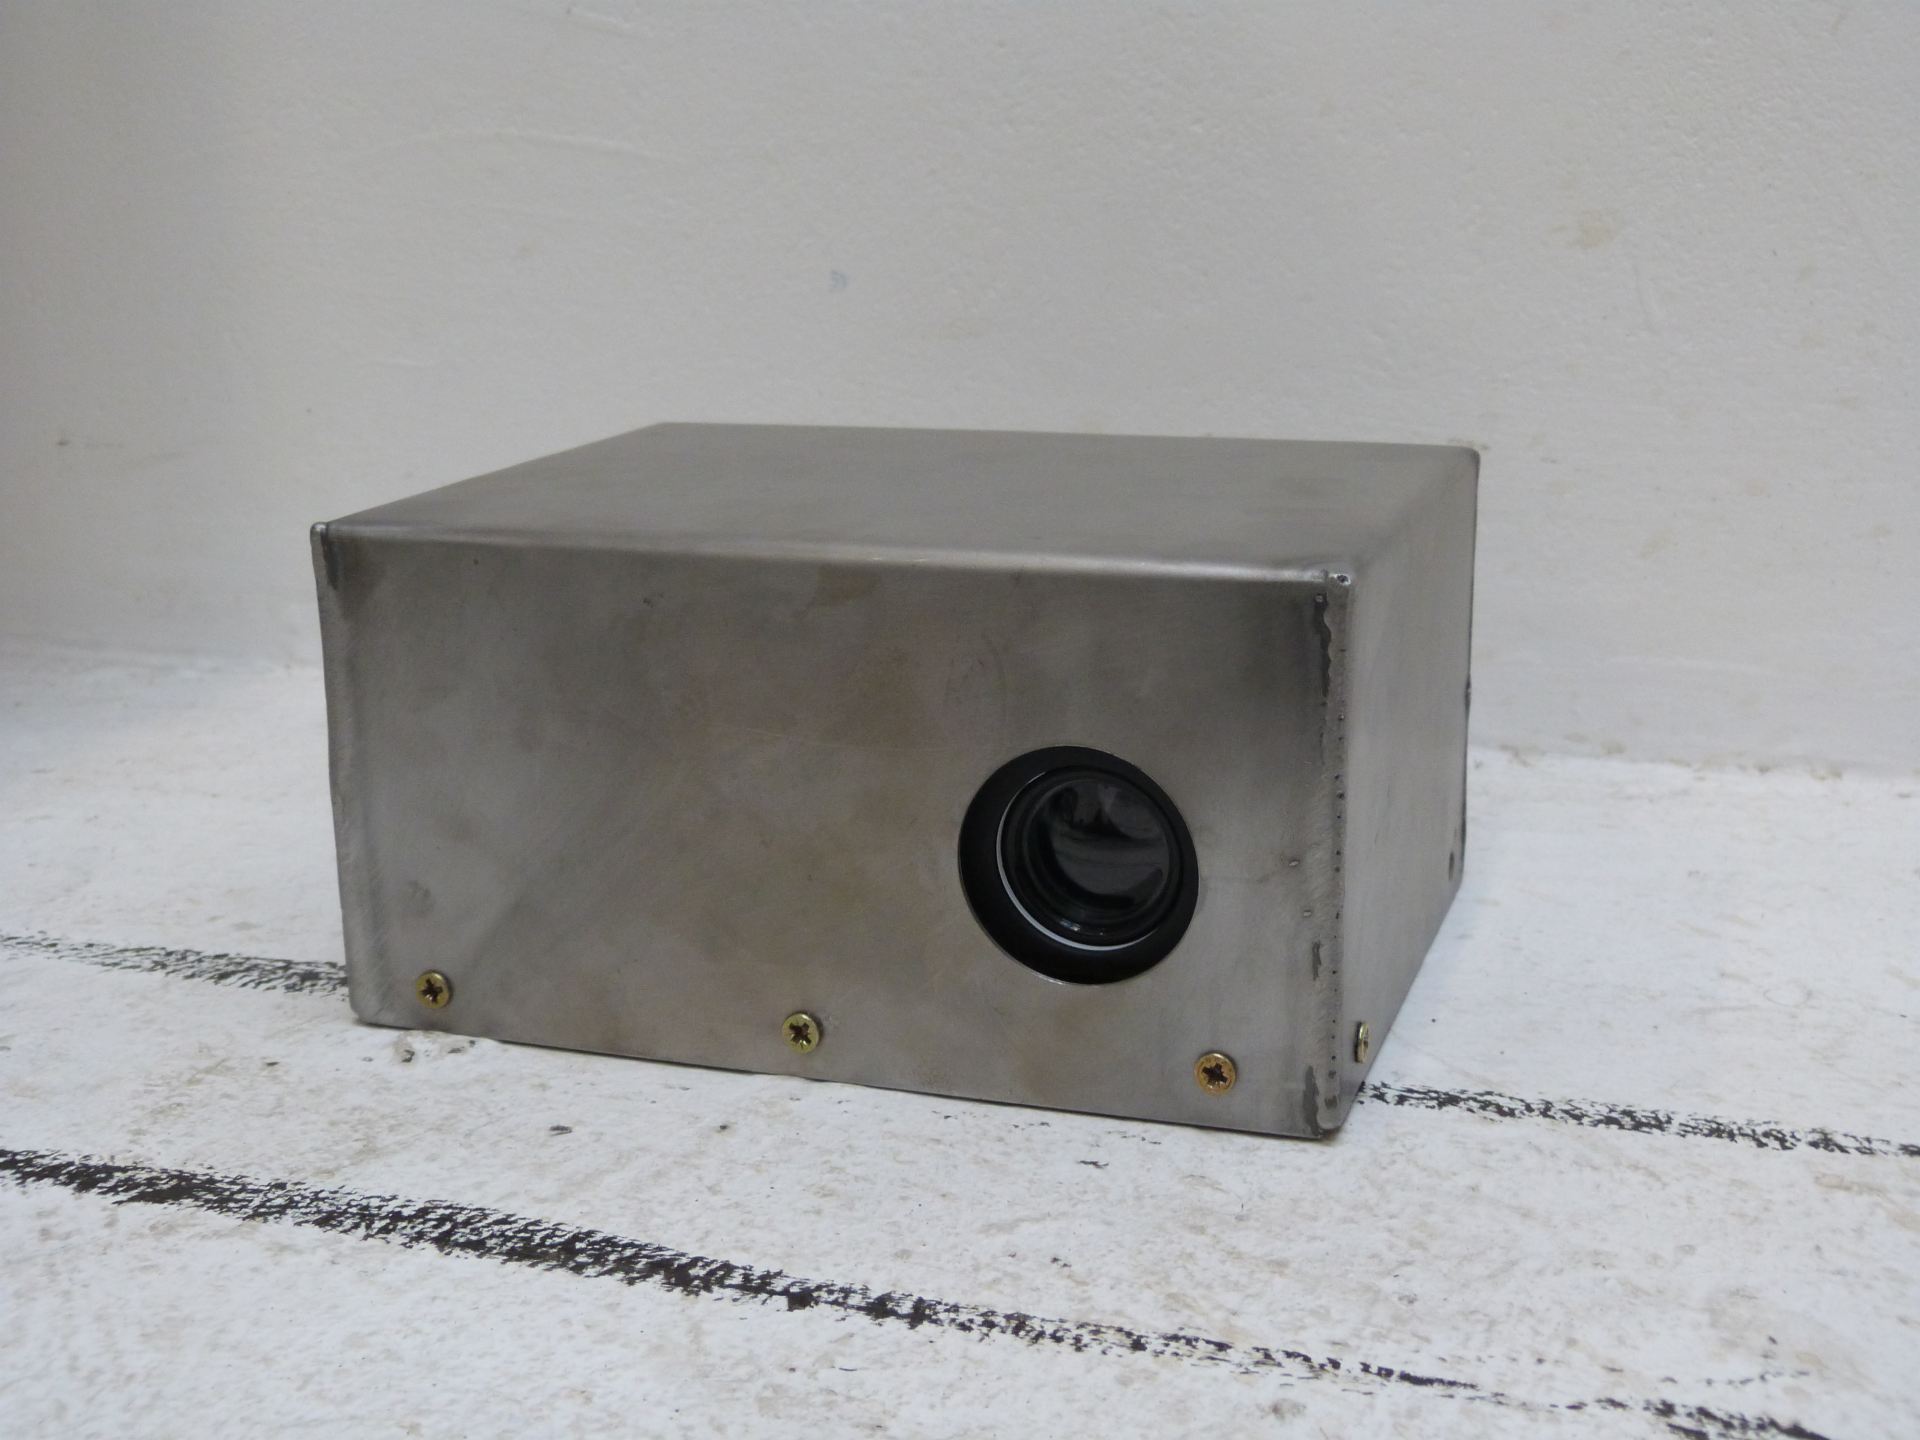 A metal box designed for holding a projector set against a white background.